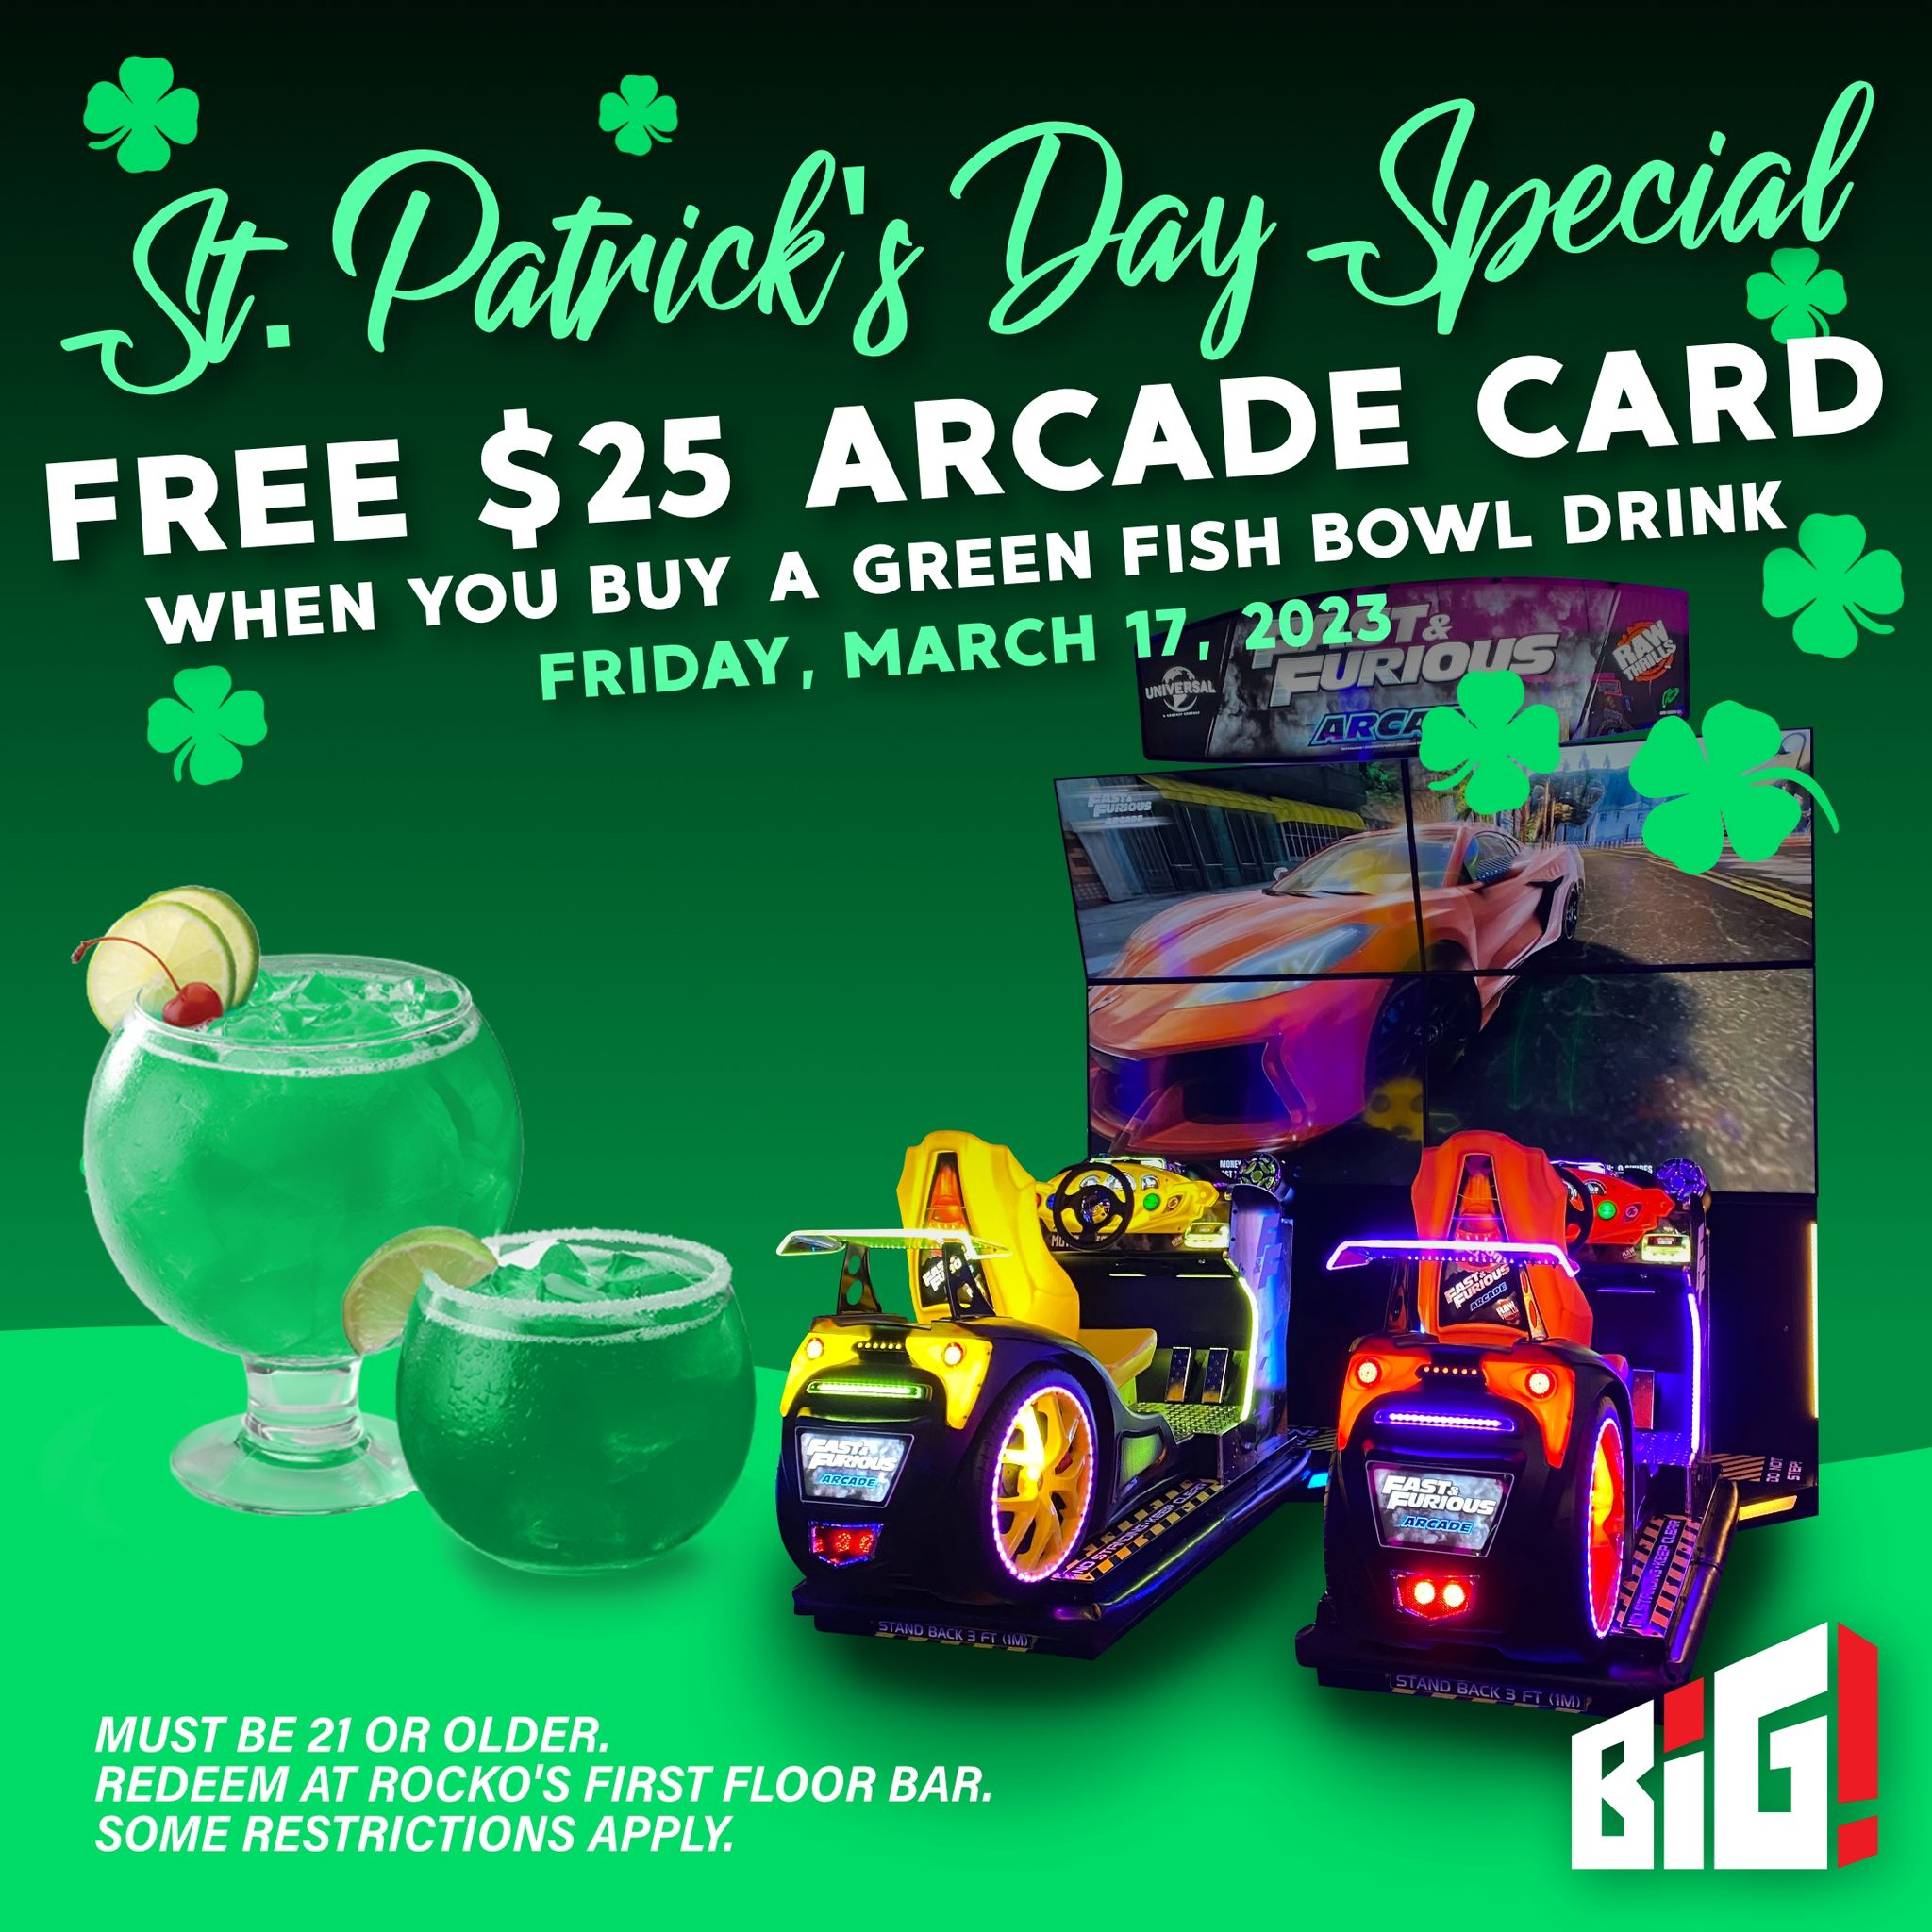 St. Patrick Day Special